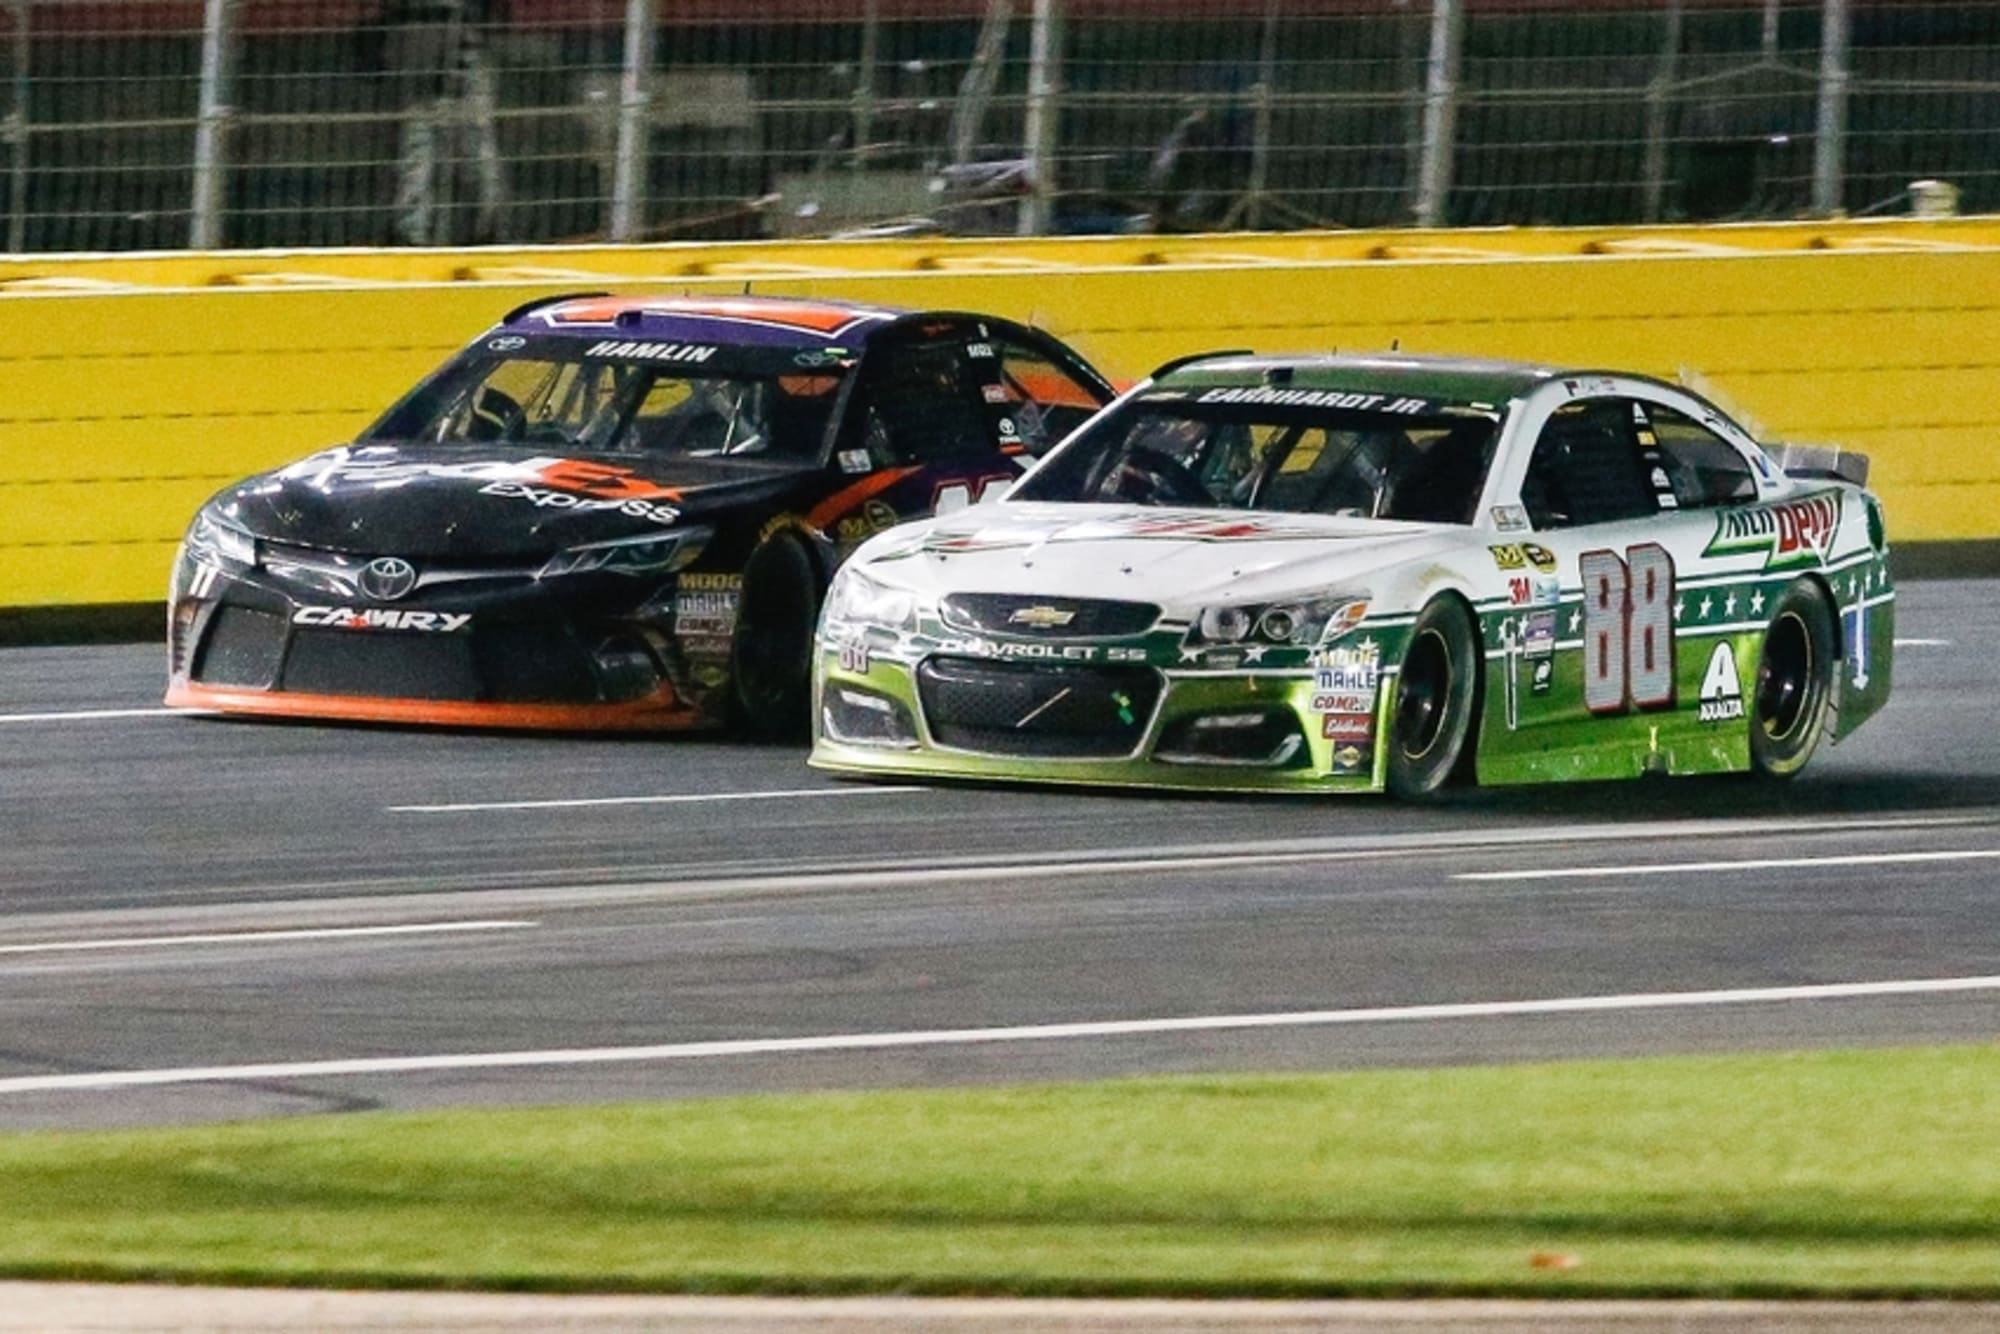 NASCAR Five Things To Watch For In The Coca-Cola 600